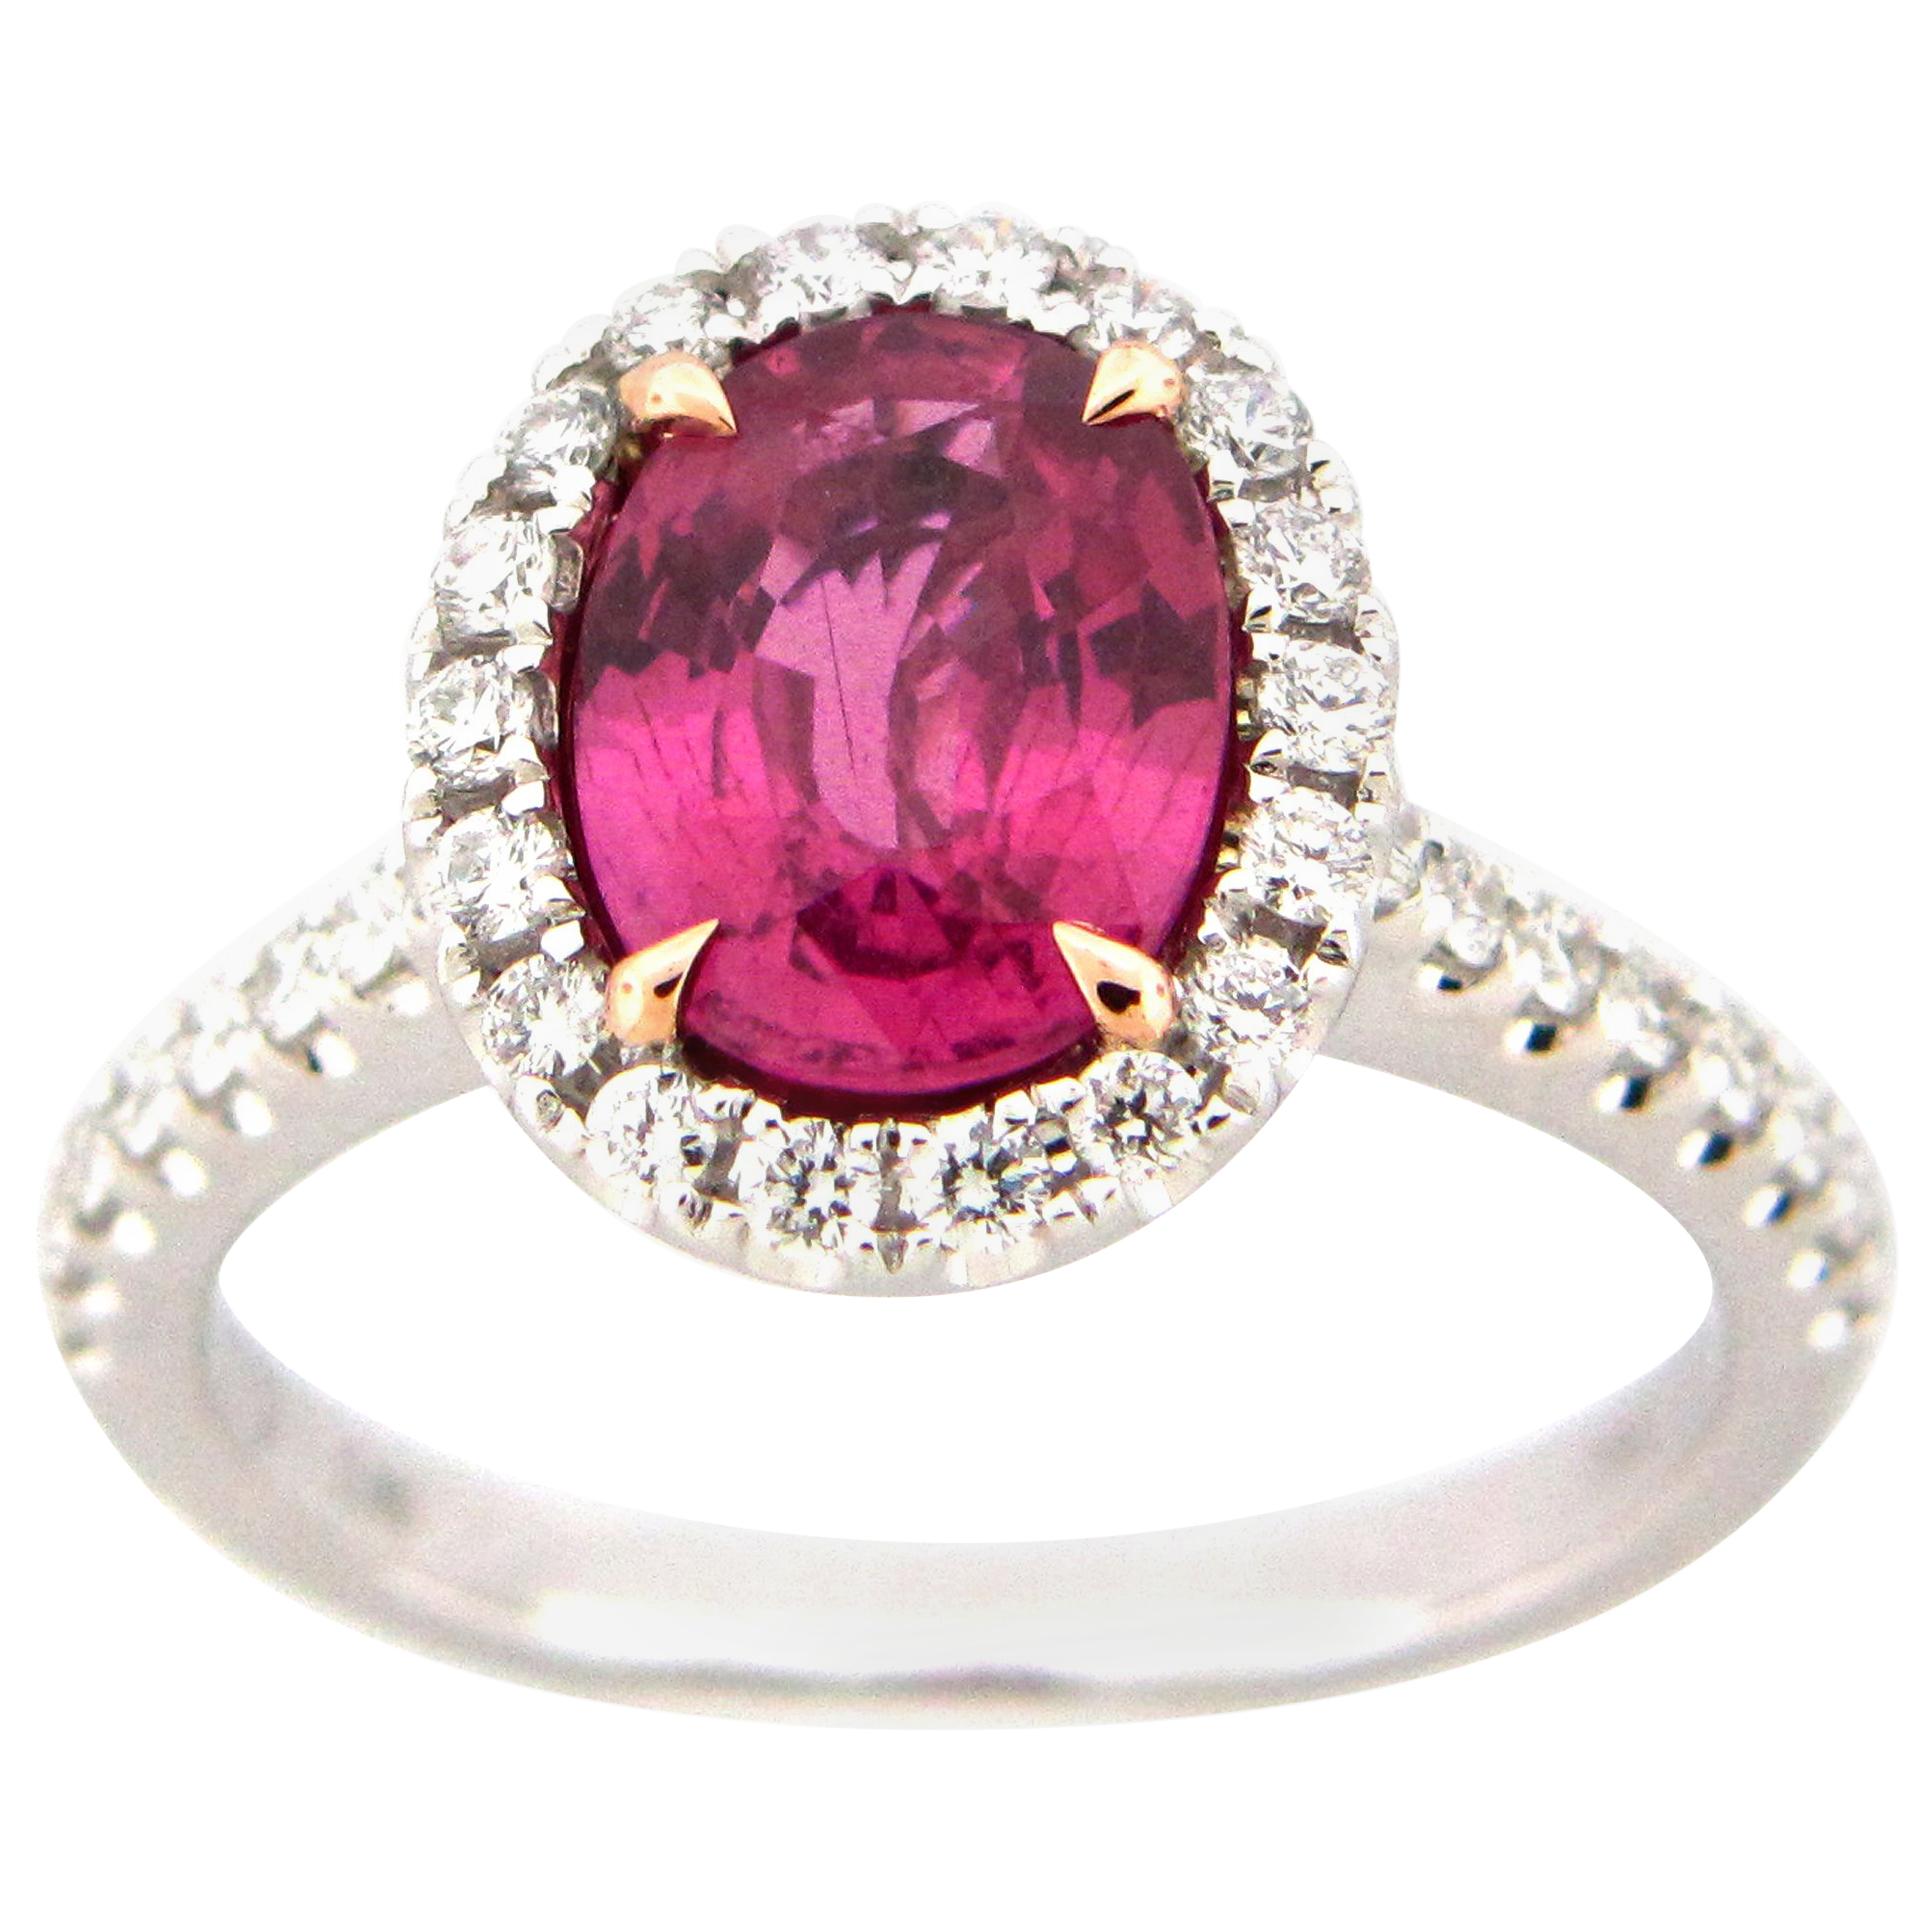 2.39 Carat Oval Pink Sapphire and Diamond Cocktail Ring